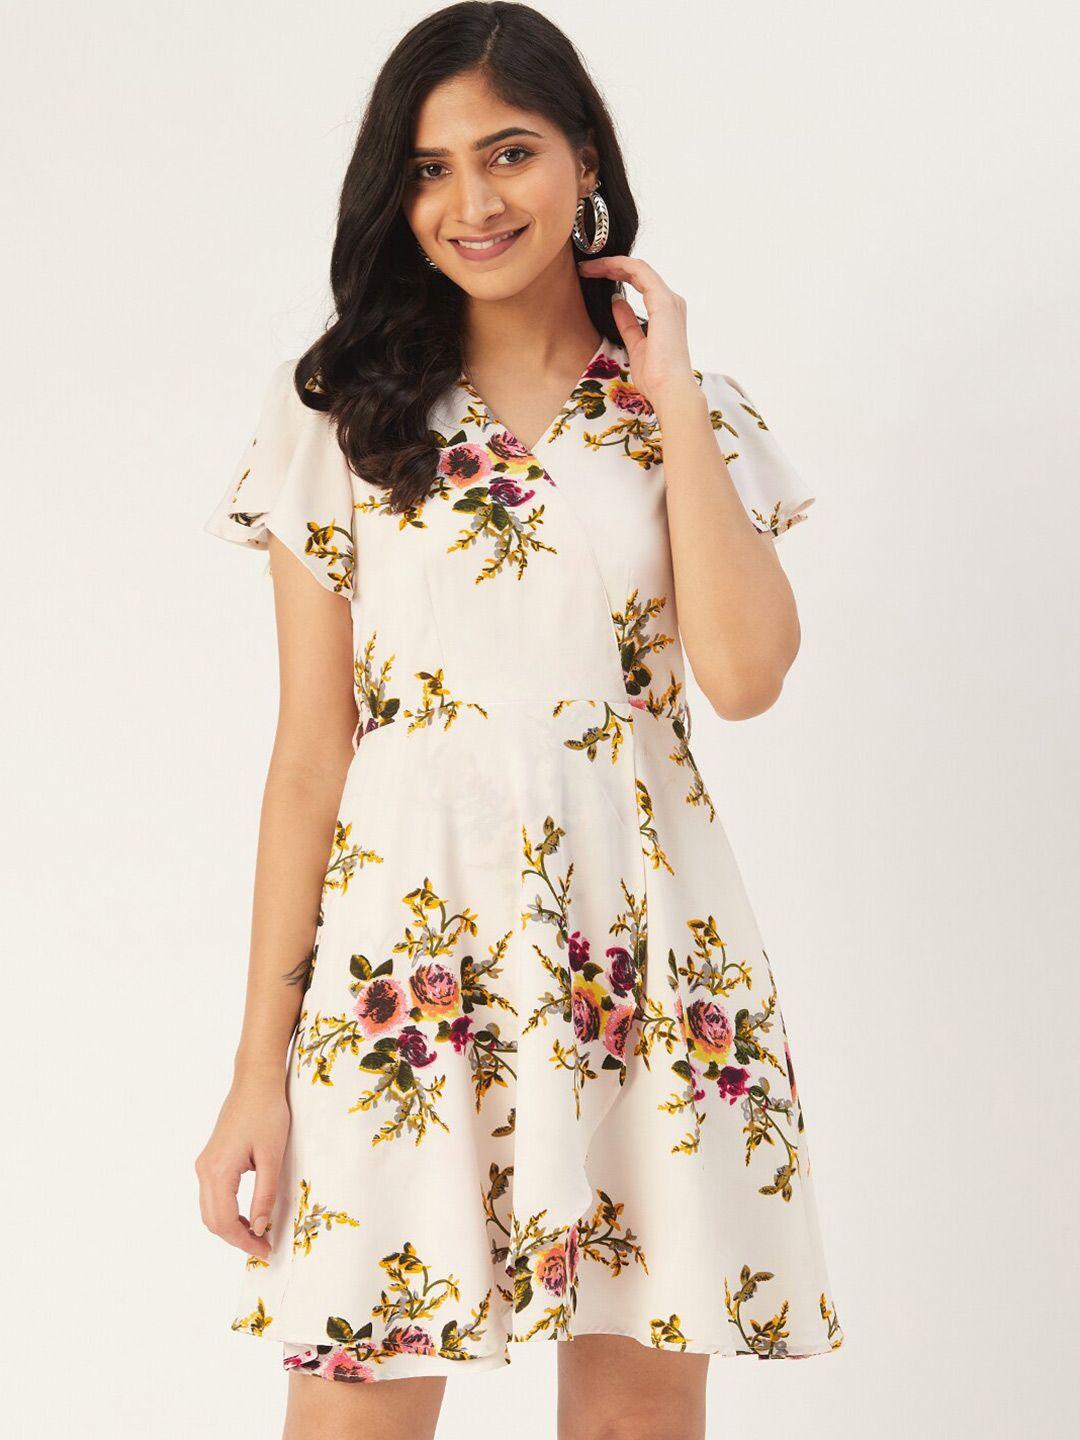 dodo & moa floral printed fit and flare dress